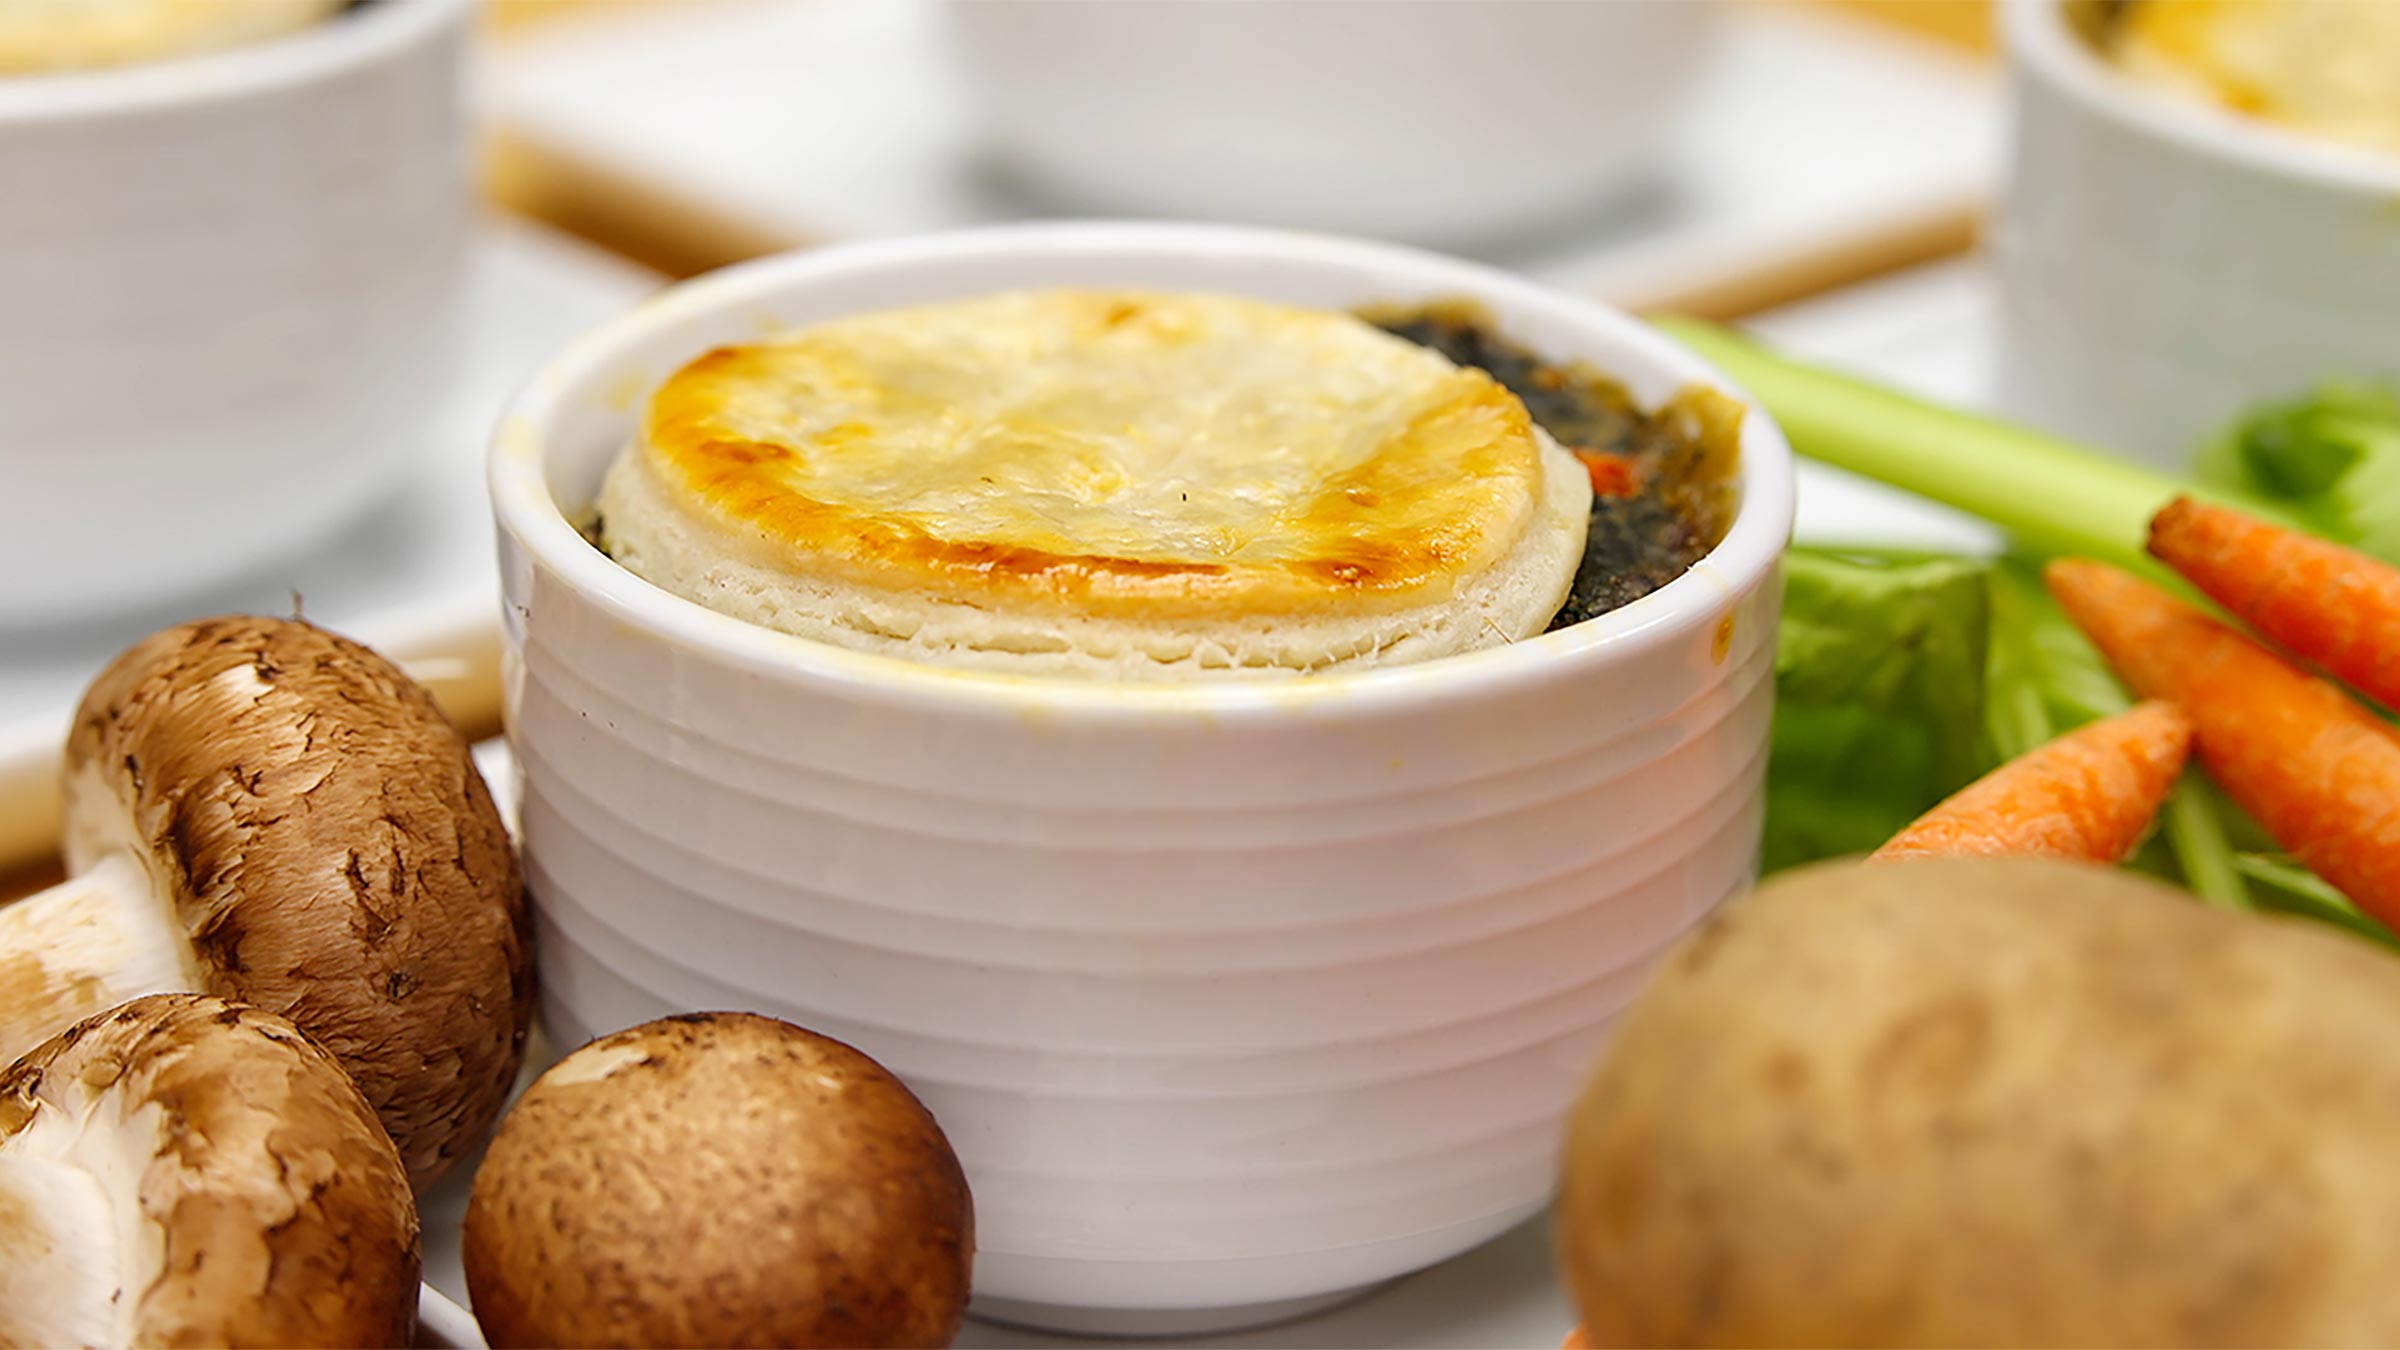 Recipe from our chefs: Spinach mushroom pot pie